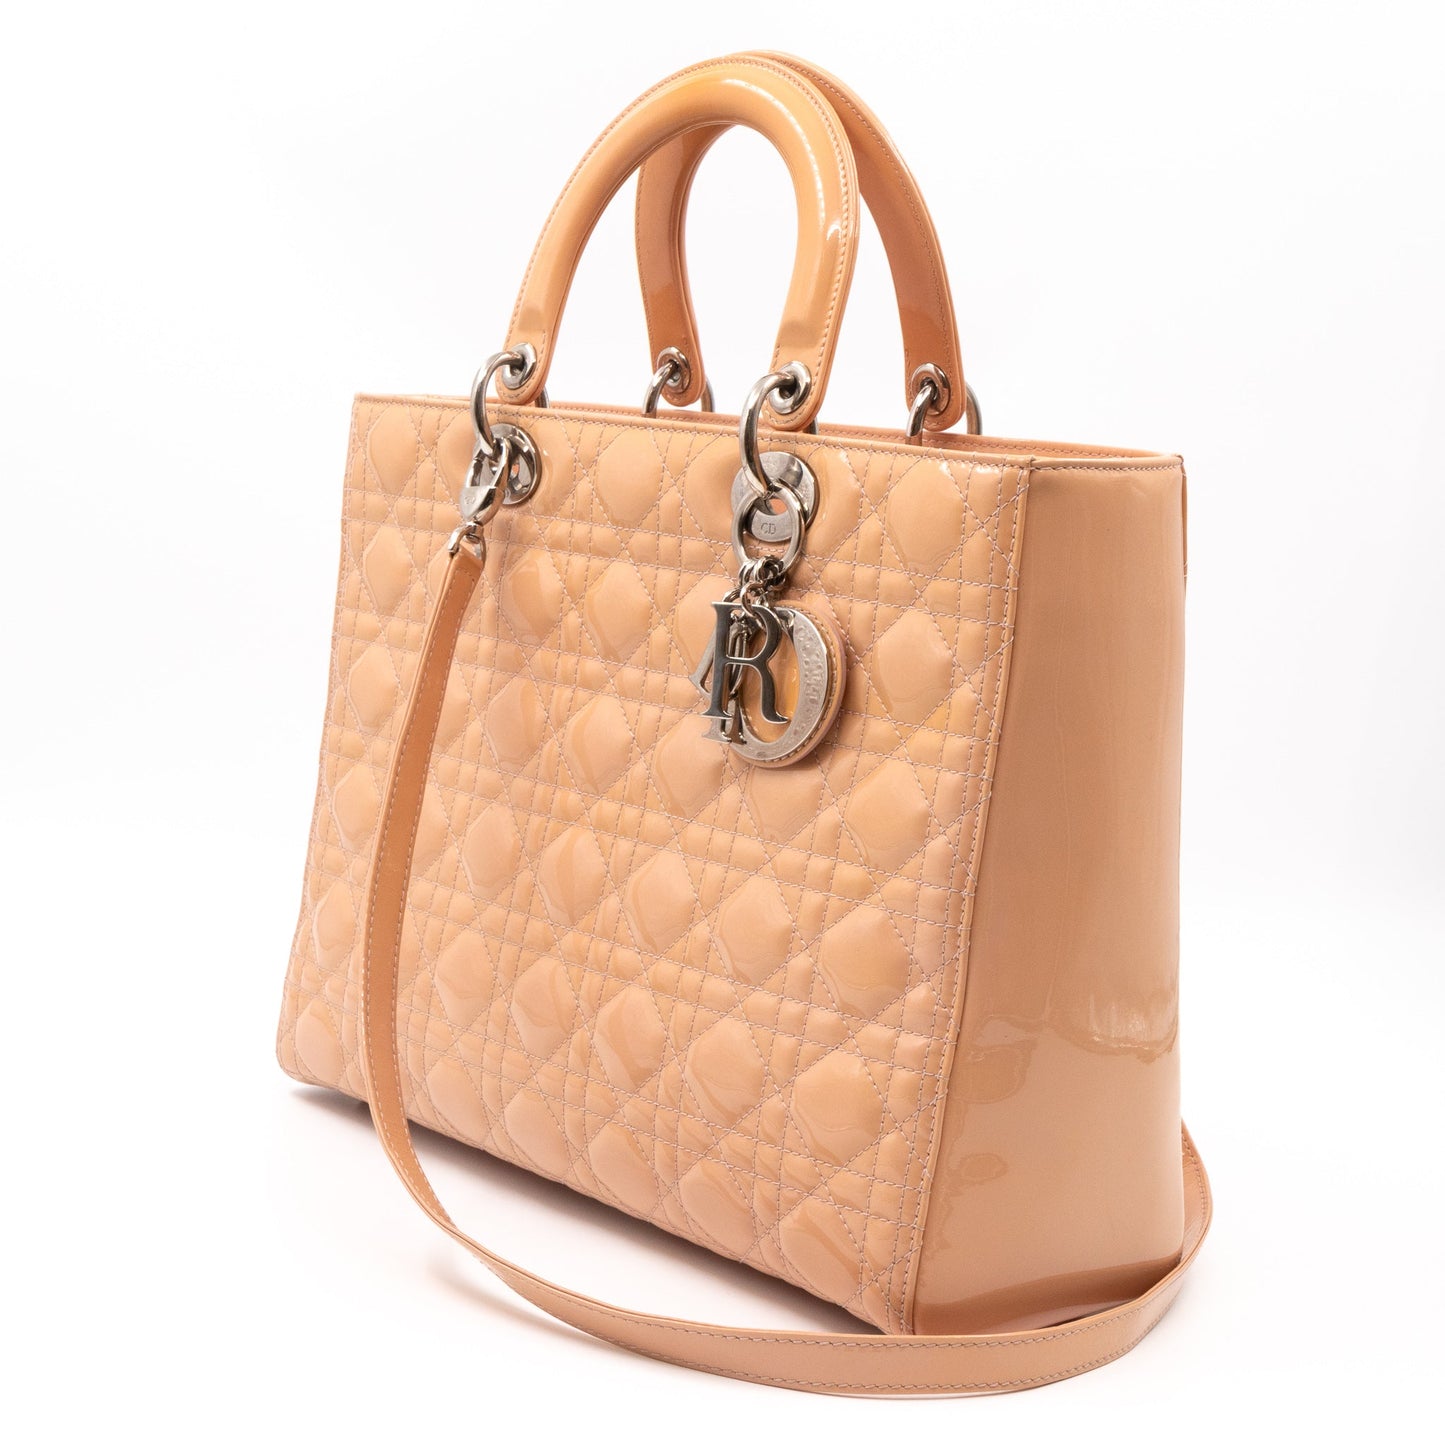 Lady Dior Large Light Beige Patent Leather